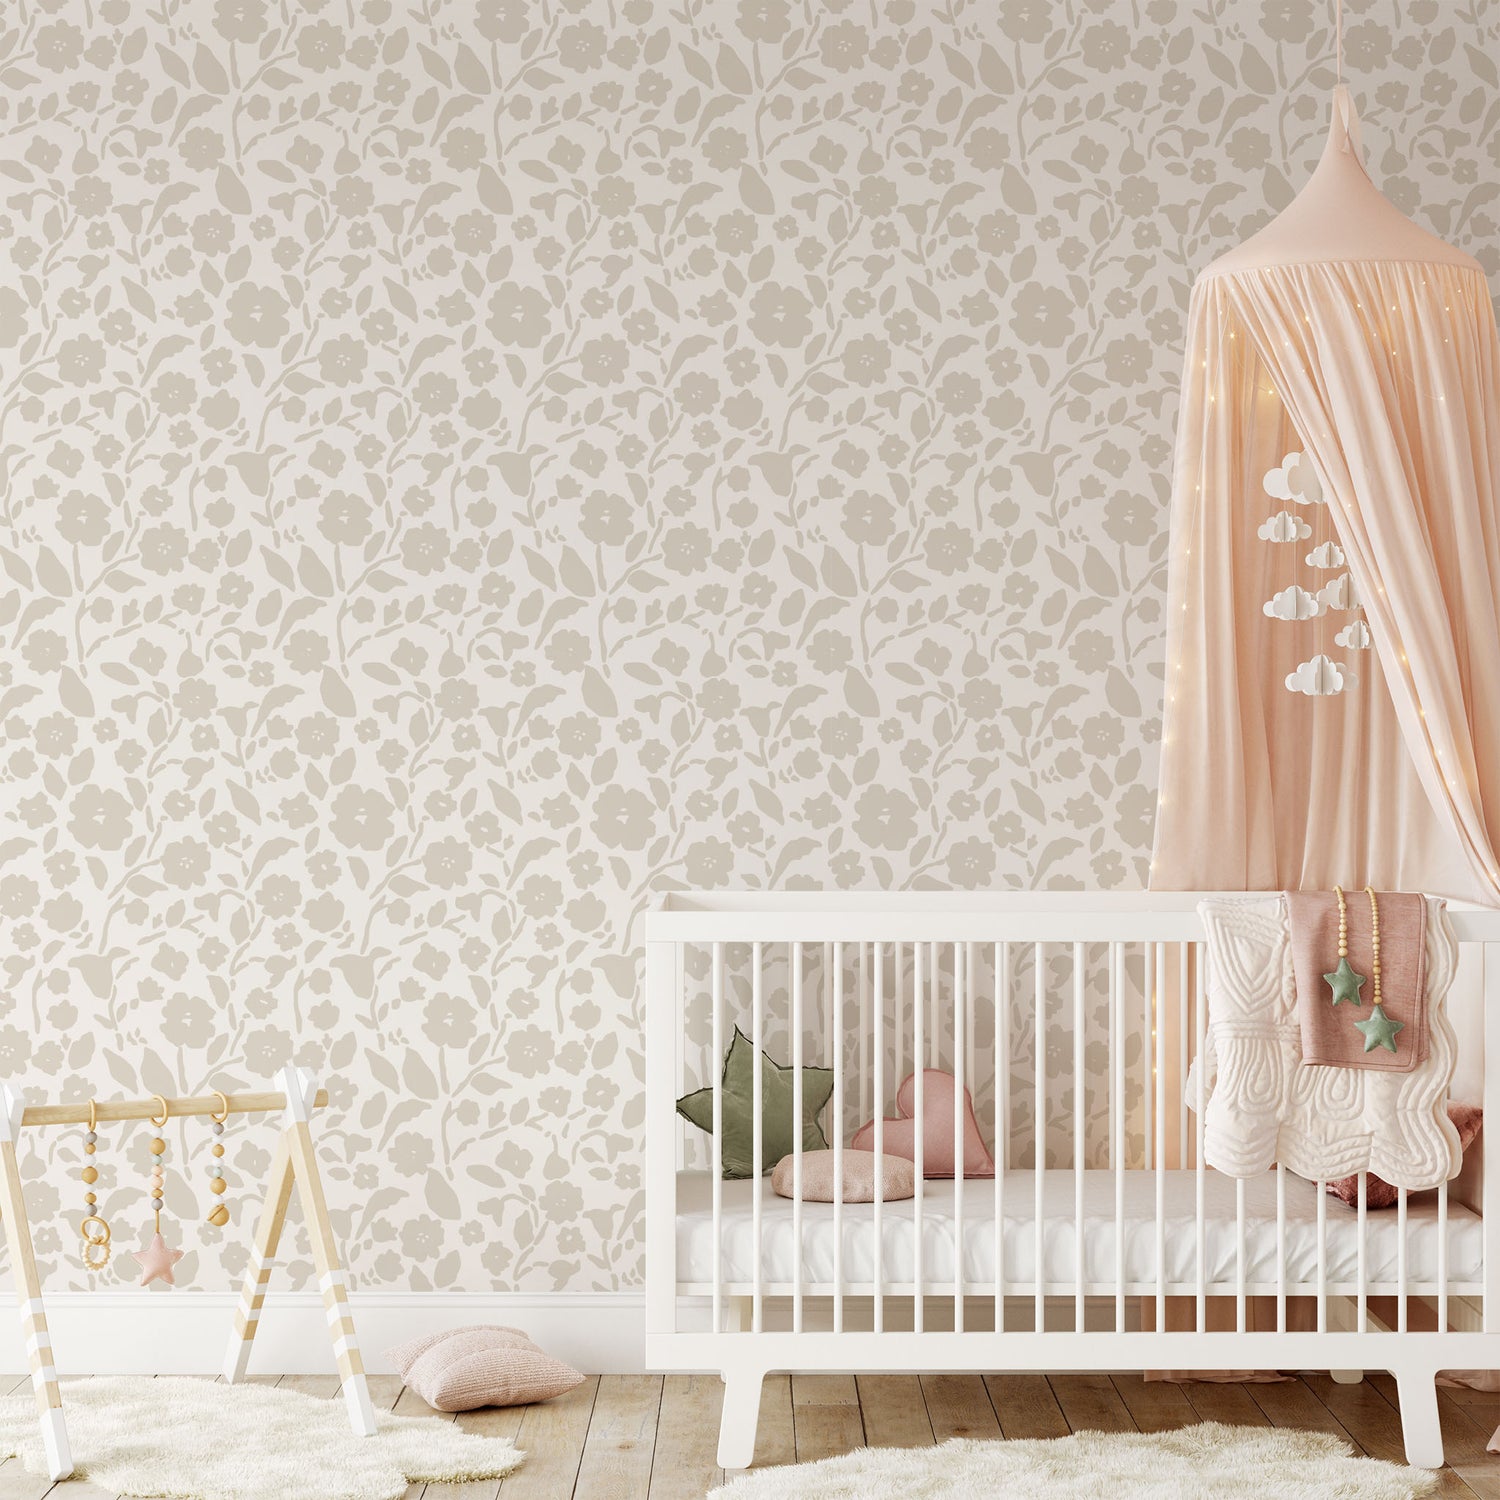 Add a touch of femininity to your space with our Lexington Wallpaper in a taupe hue shown in a full size image.